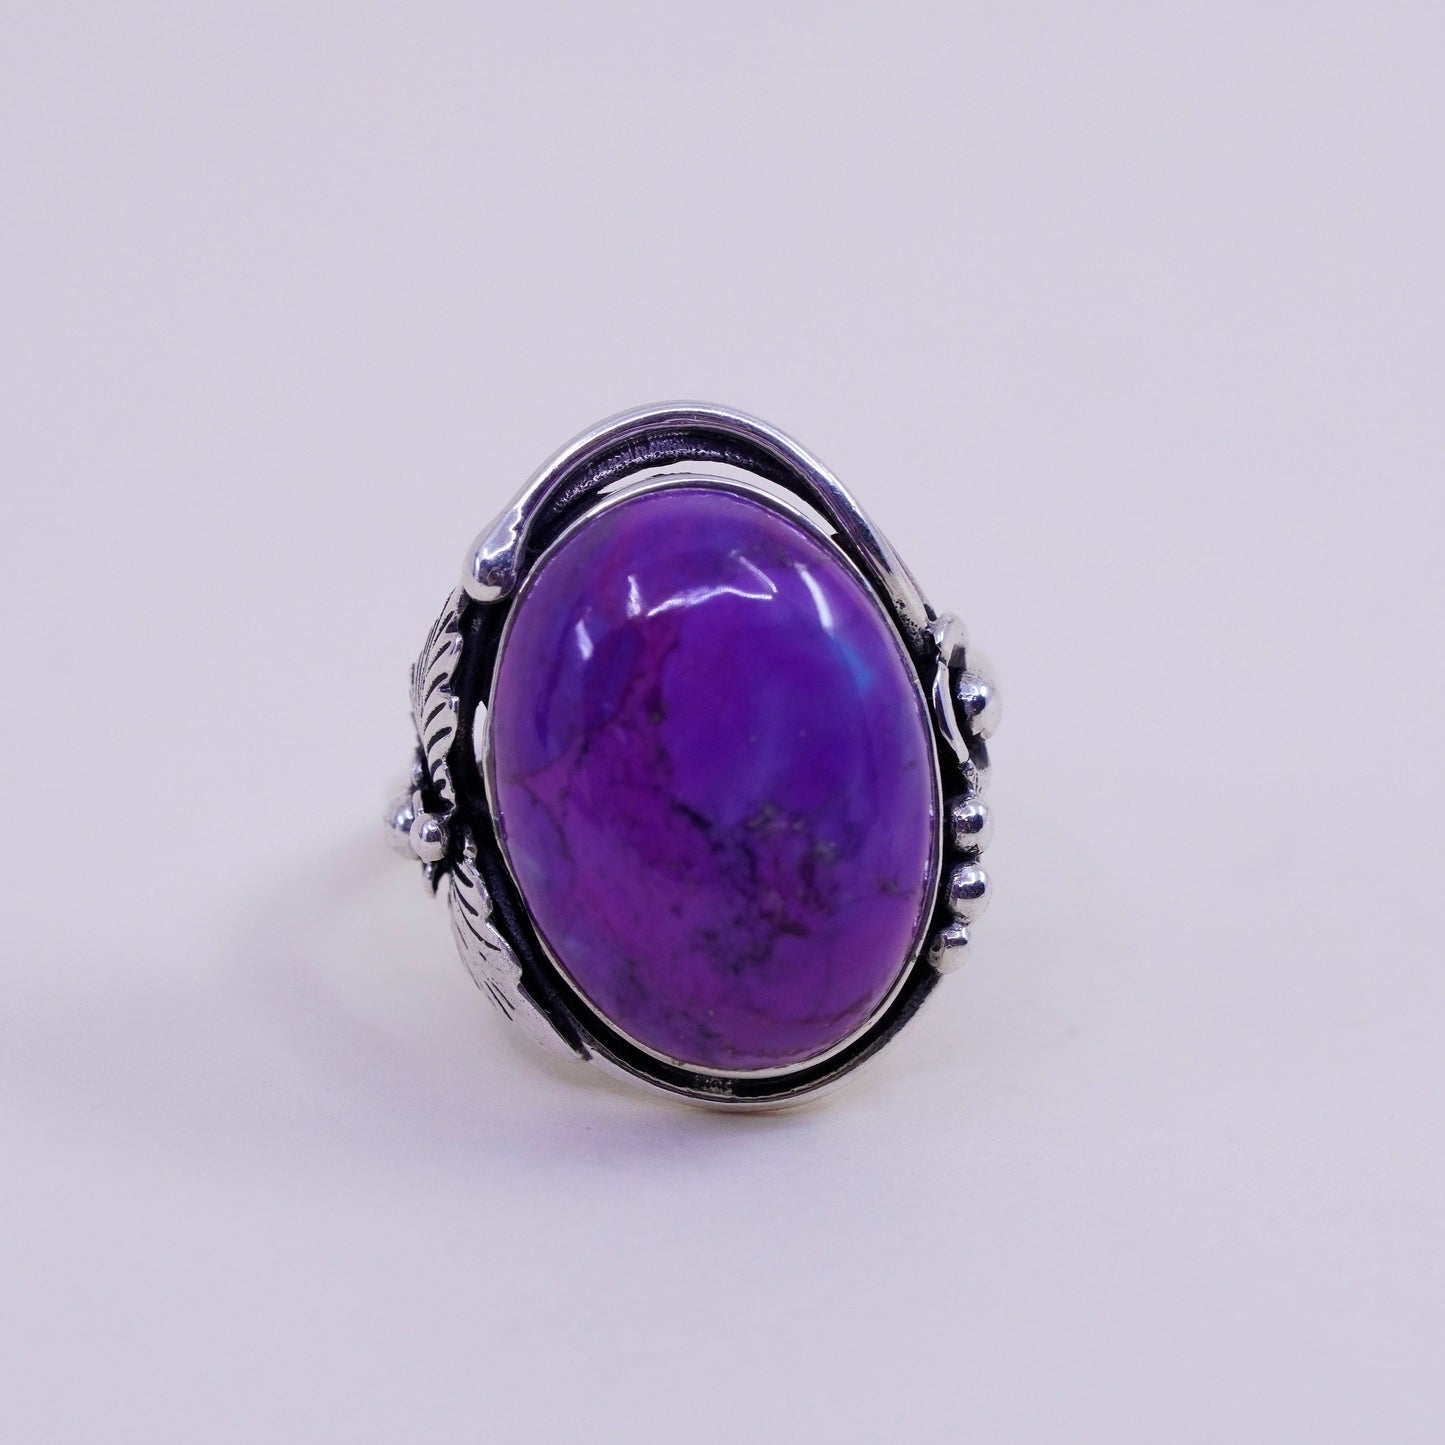 Size 8, BBJ sterling silver handmade 925 ring with oval purple turquoise beads